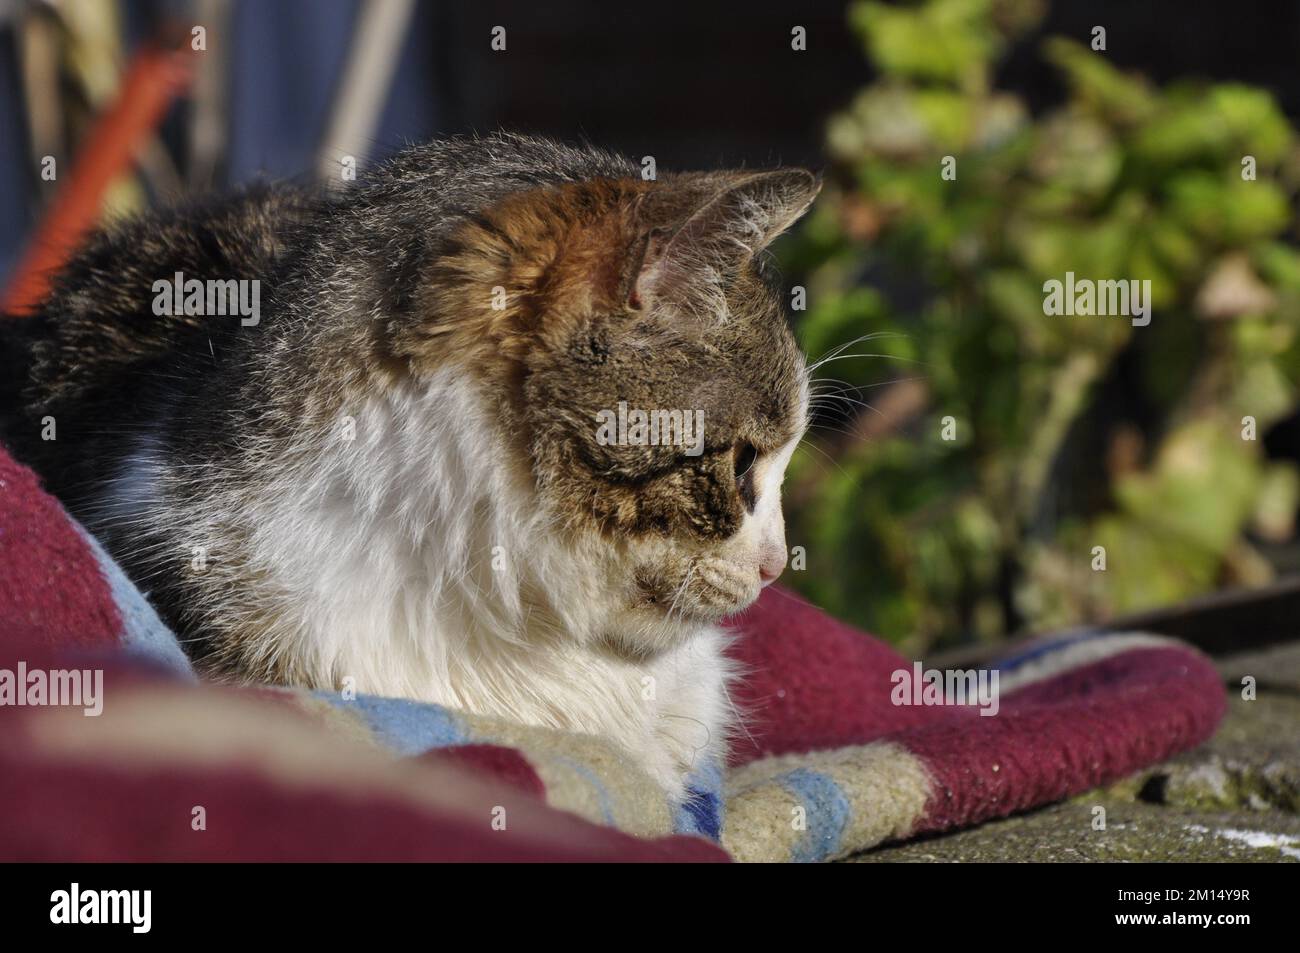 Cat on an authentic carpet. Stock Photo